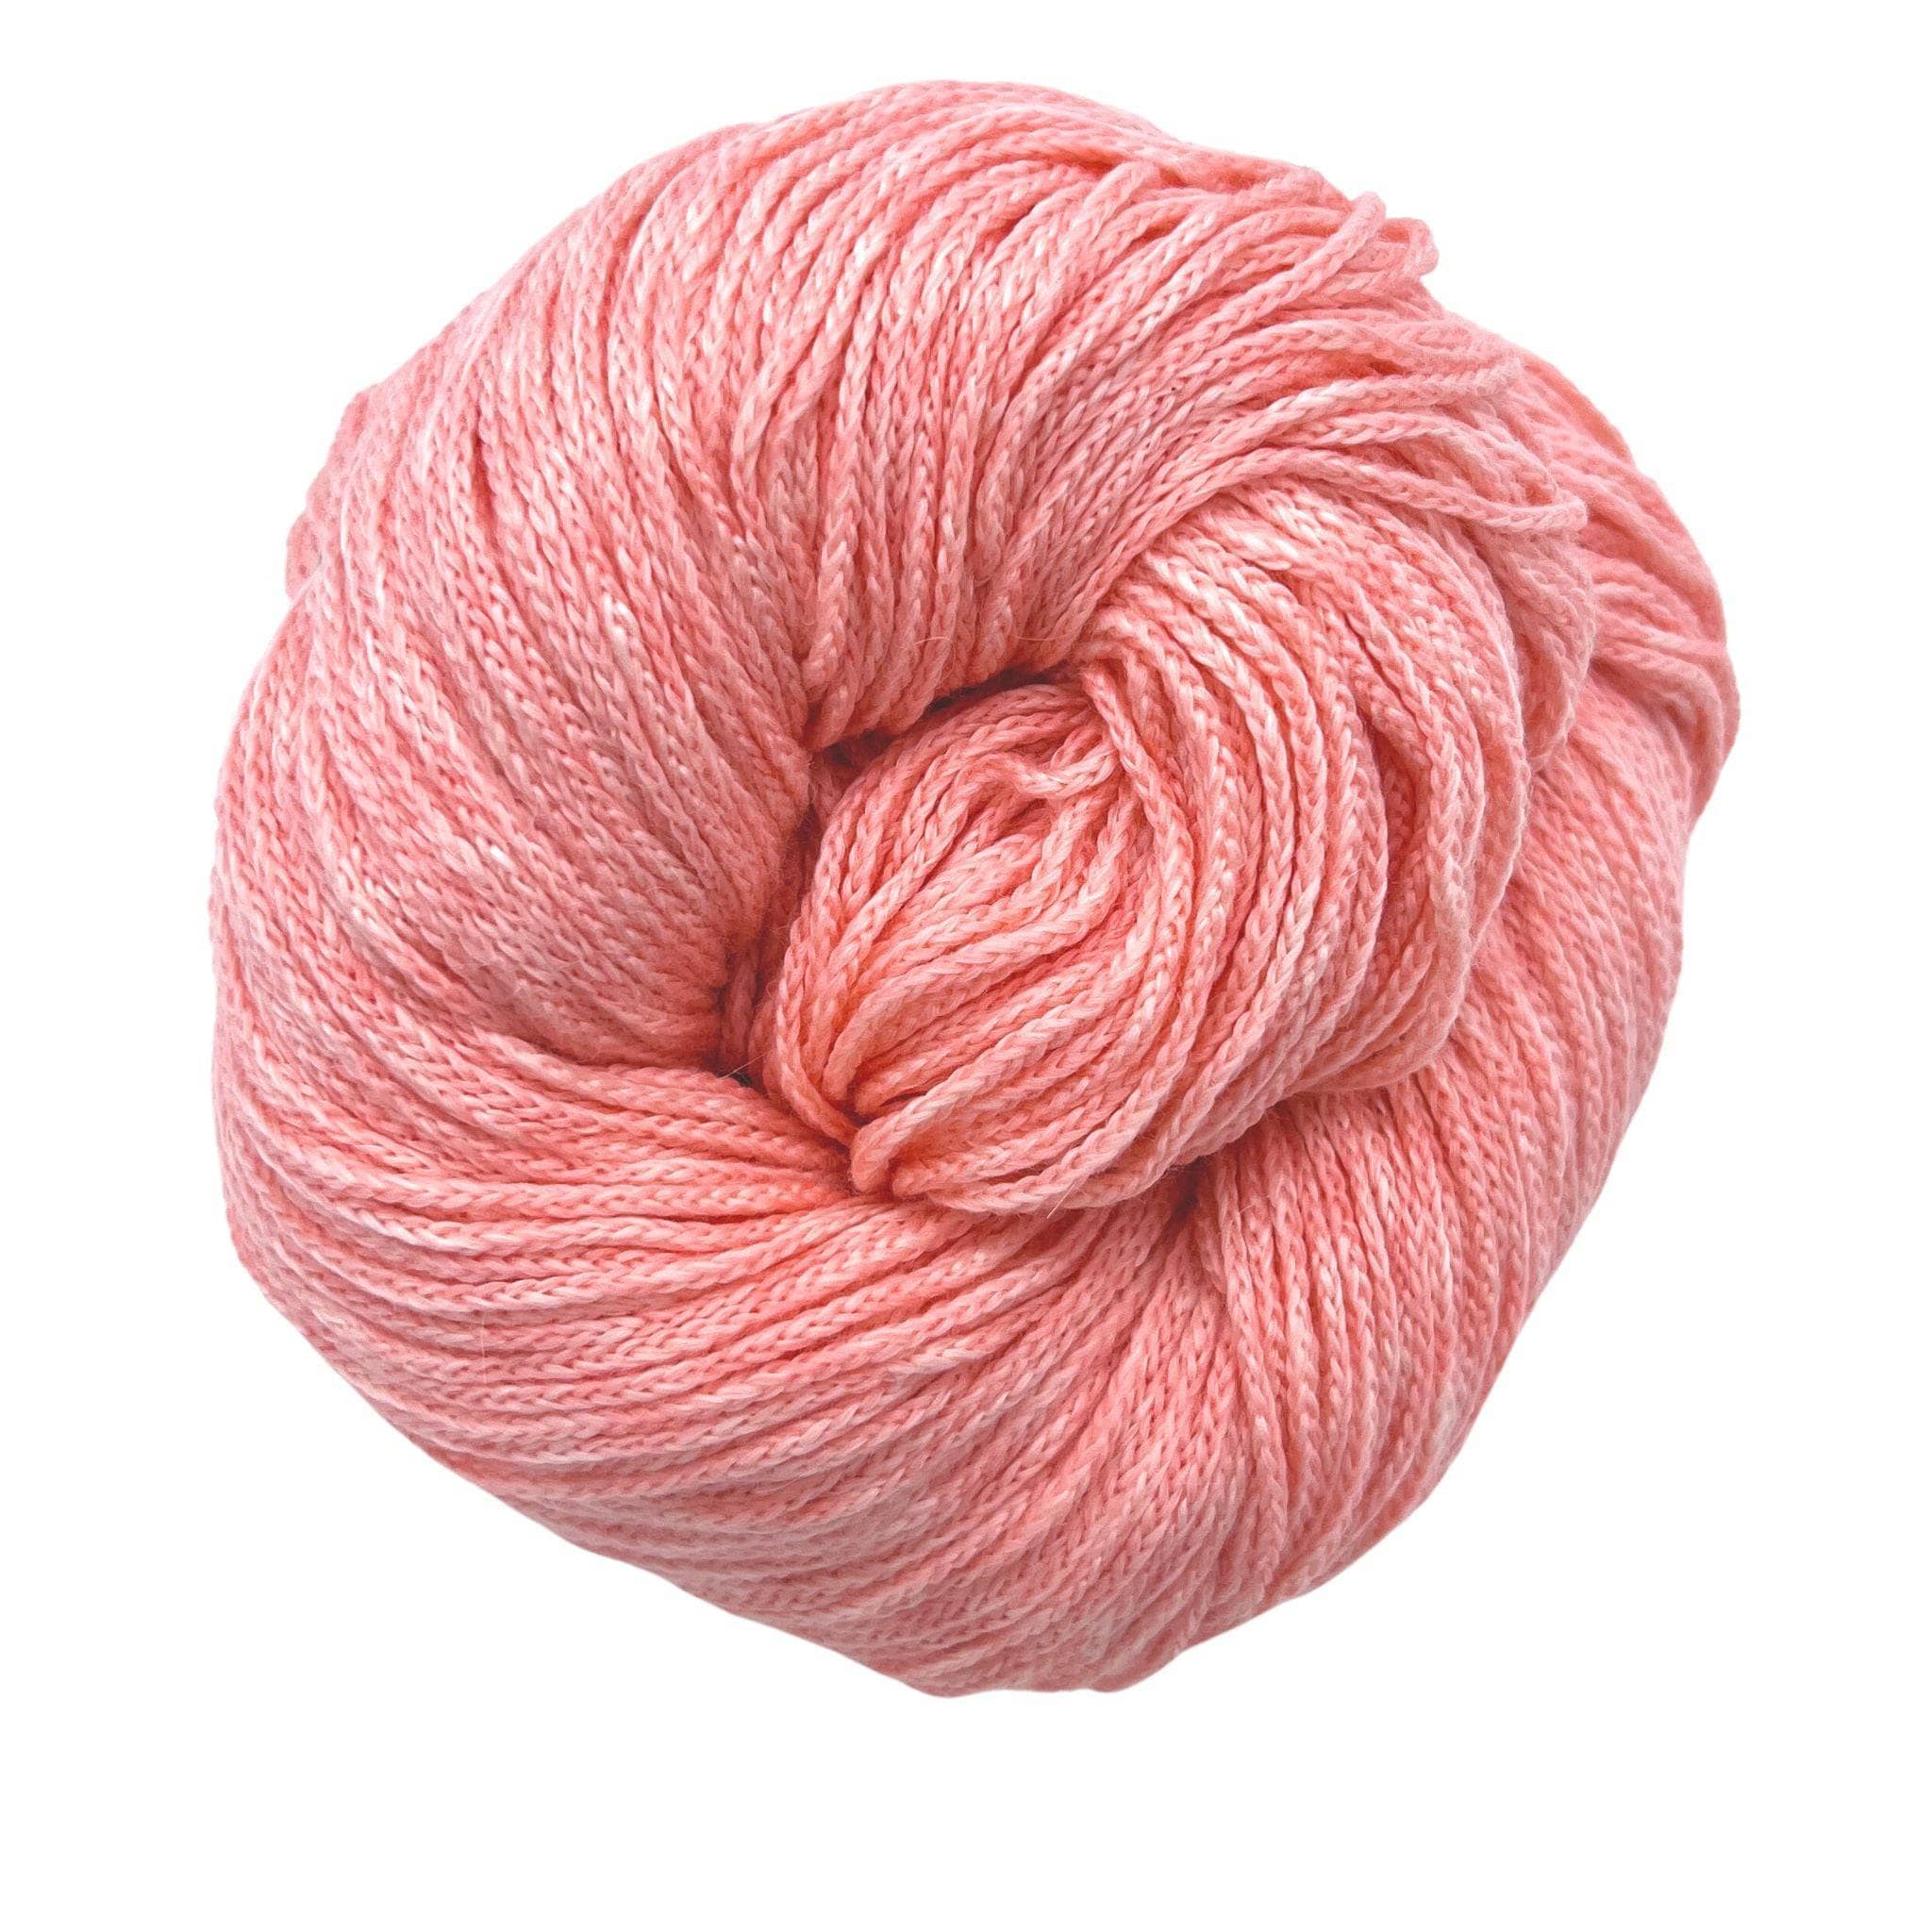 Washable, worsted weight/DK merino blend yarn. Perfect for knitting and  crochet — Lancaster Yarn Shop